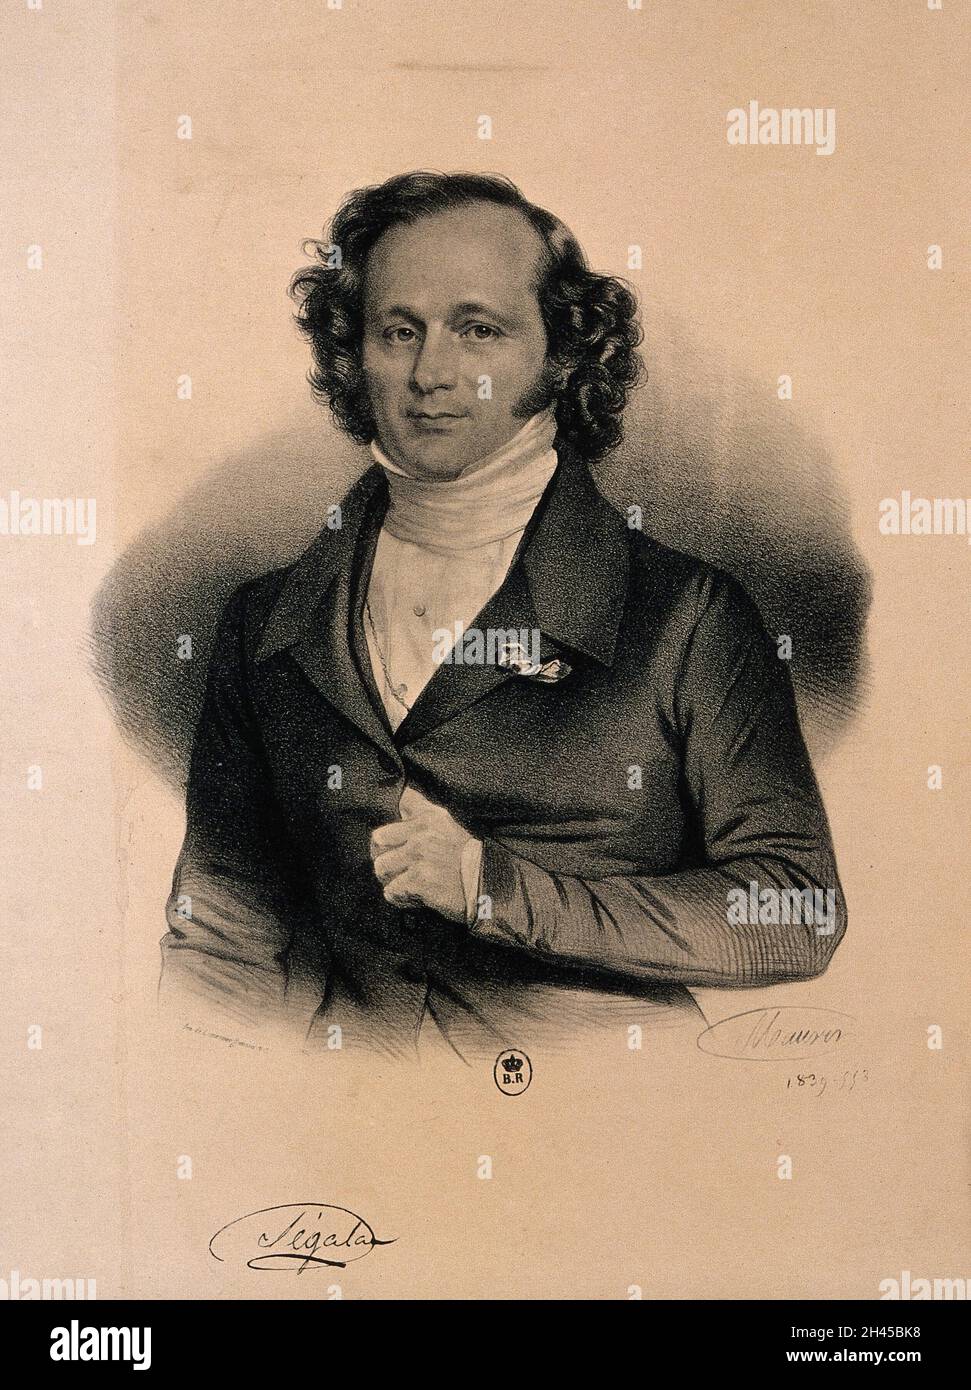 Pierre Salomon Segalas. Reproduction of lithograph by Maurin, 1839 Stock  Photo - Alamy